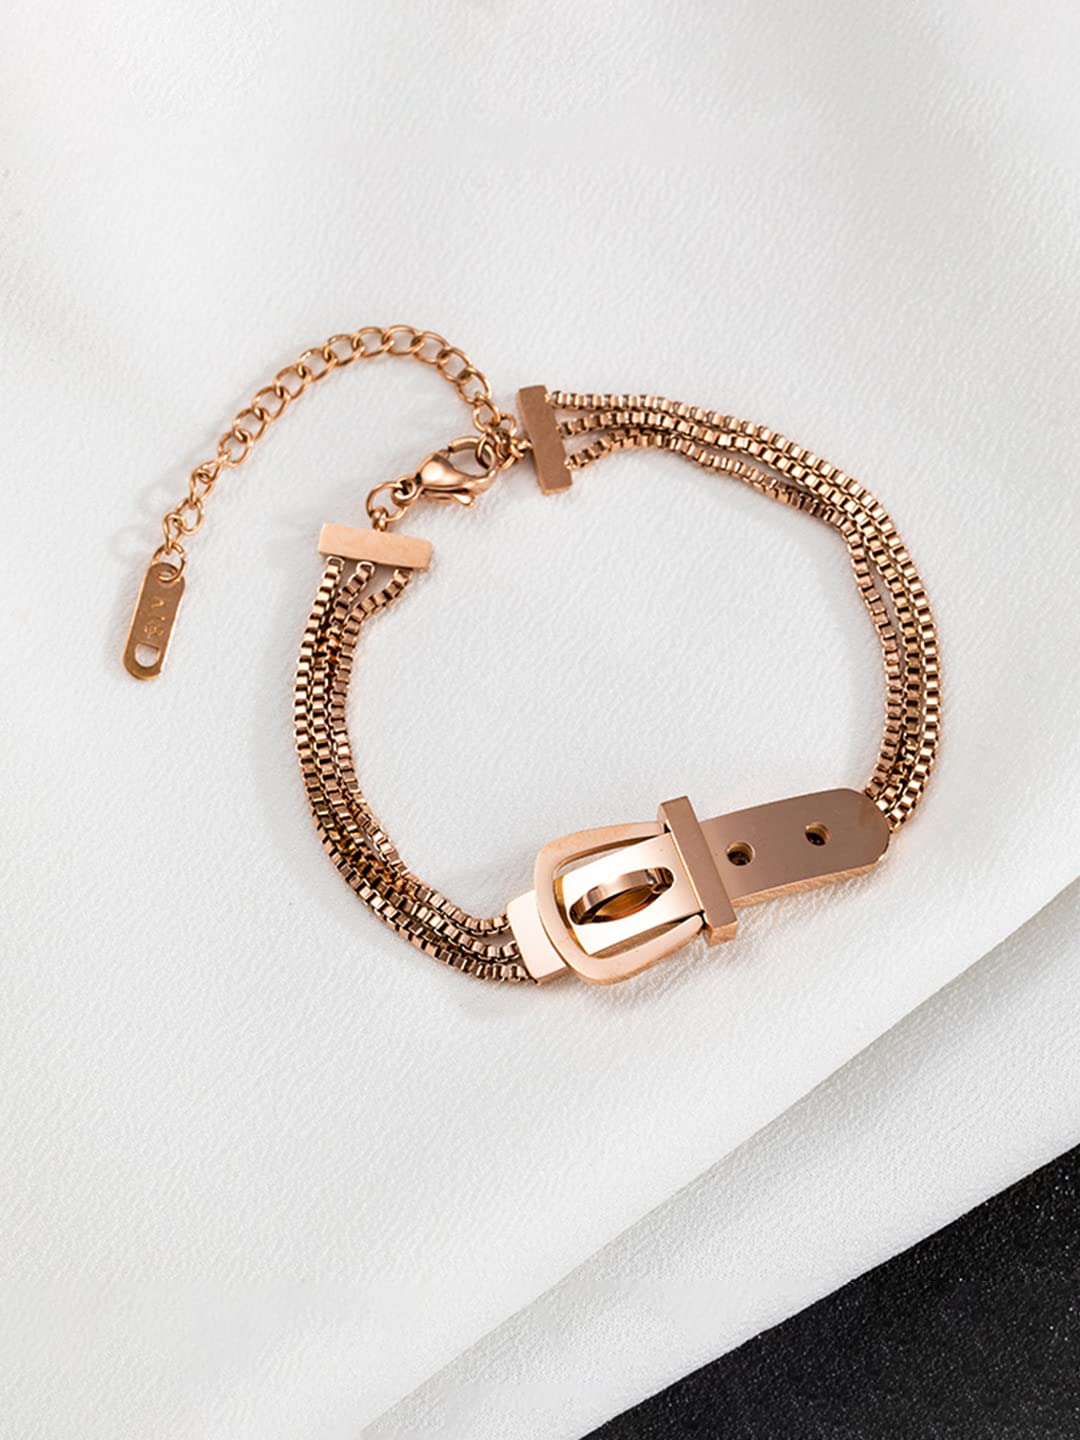 Yellow Chimes Bracelet for Women Rose Gold-Plated Multilayered Tang Belt Design Chain Bracelet For Women and Girls